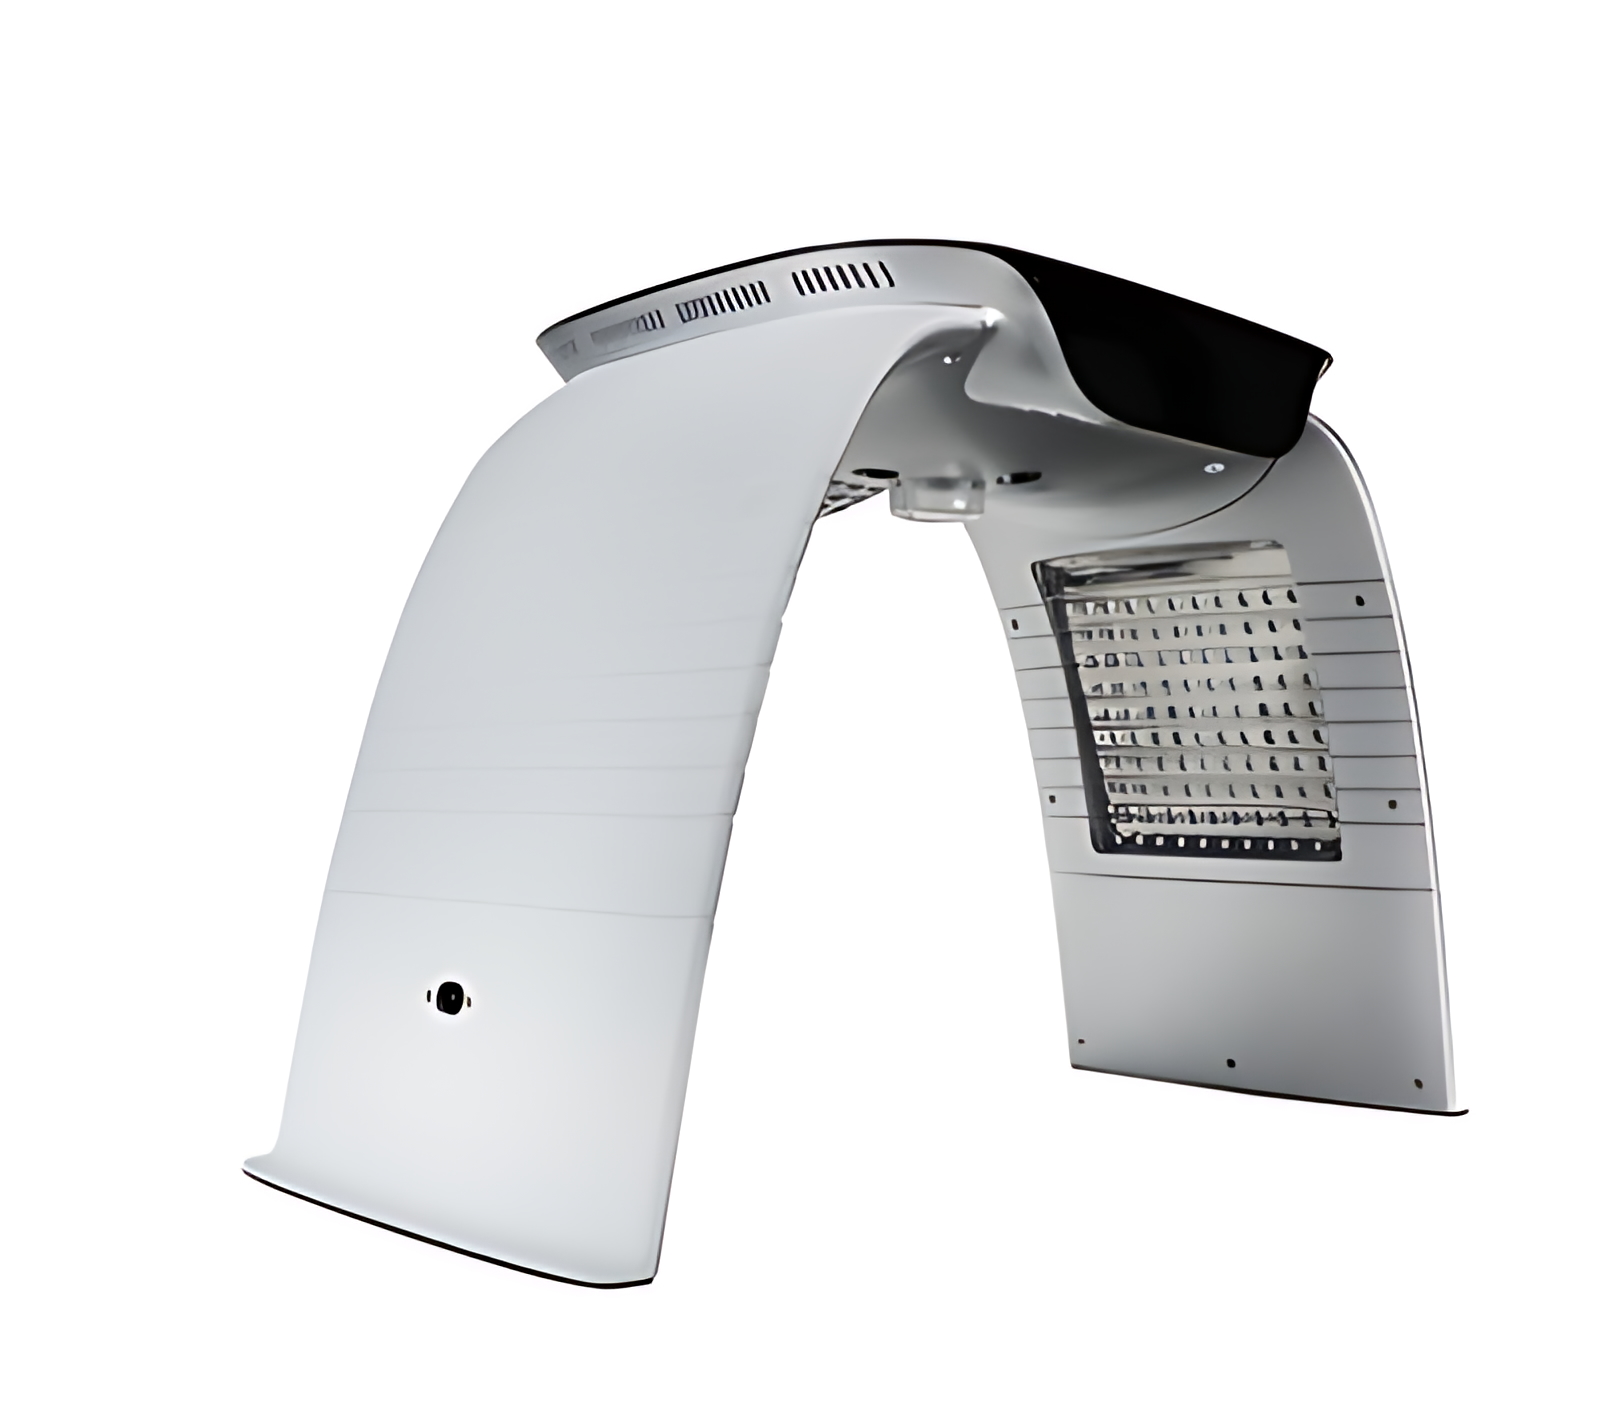 LED PDT (Photodynamic Therapy) light therapy with facial steamer